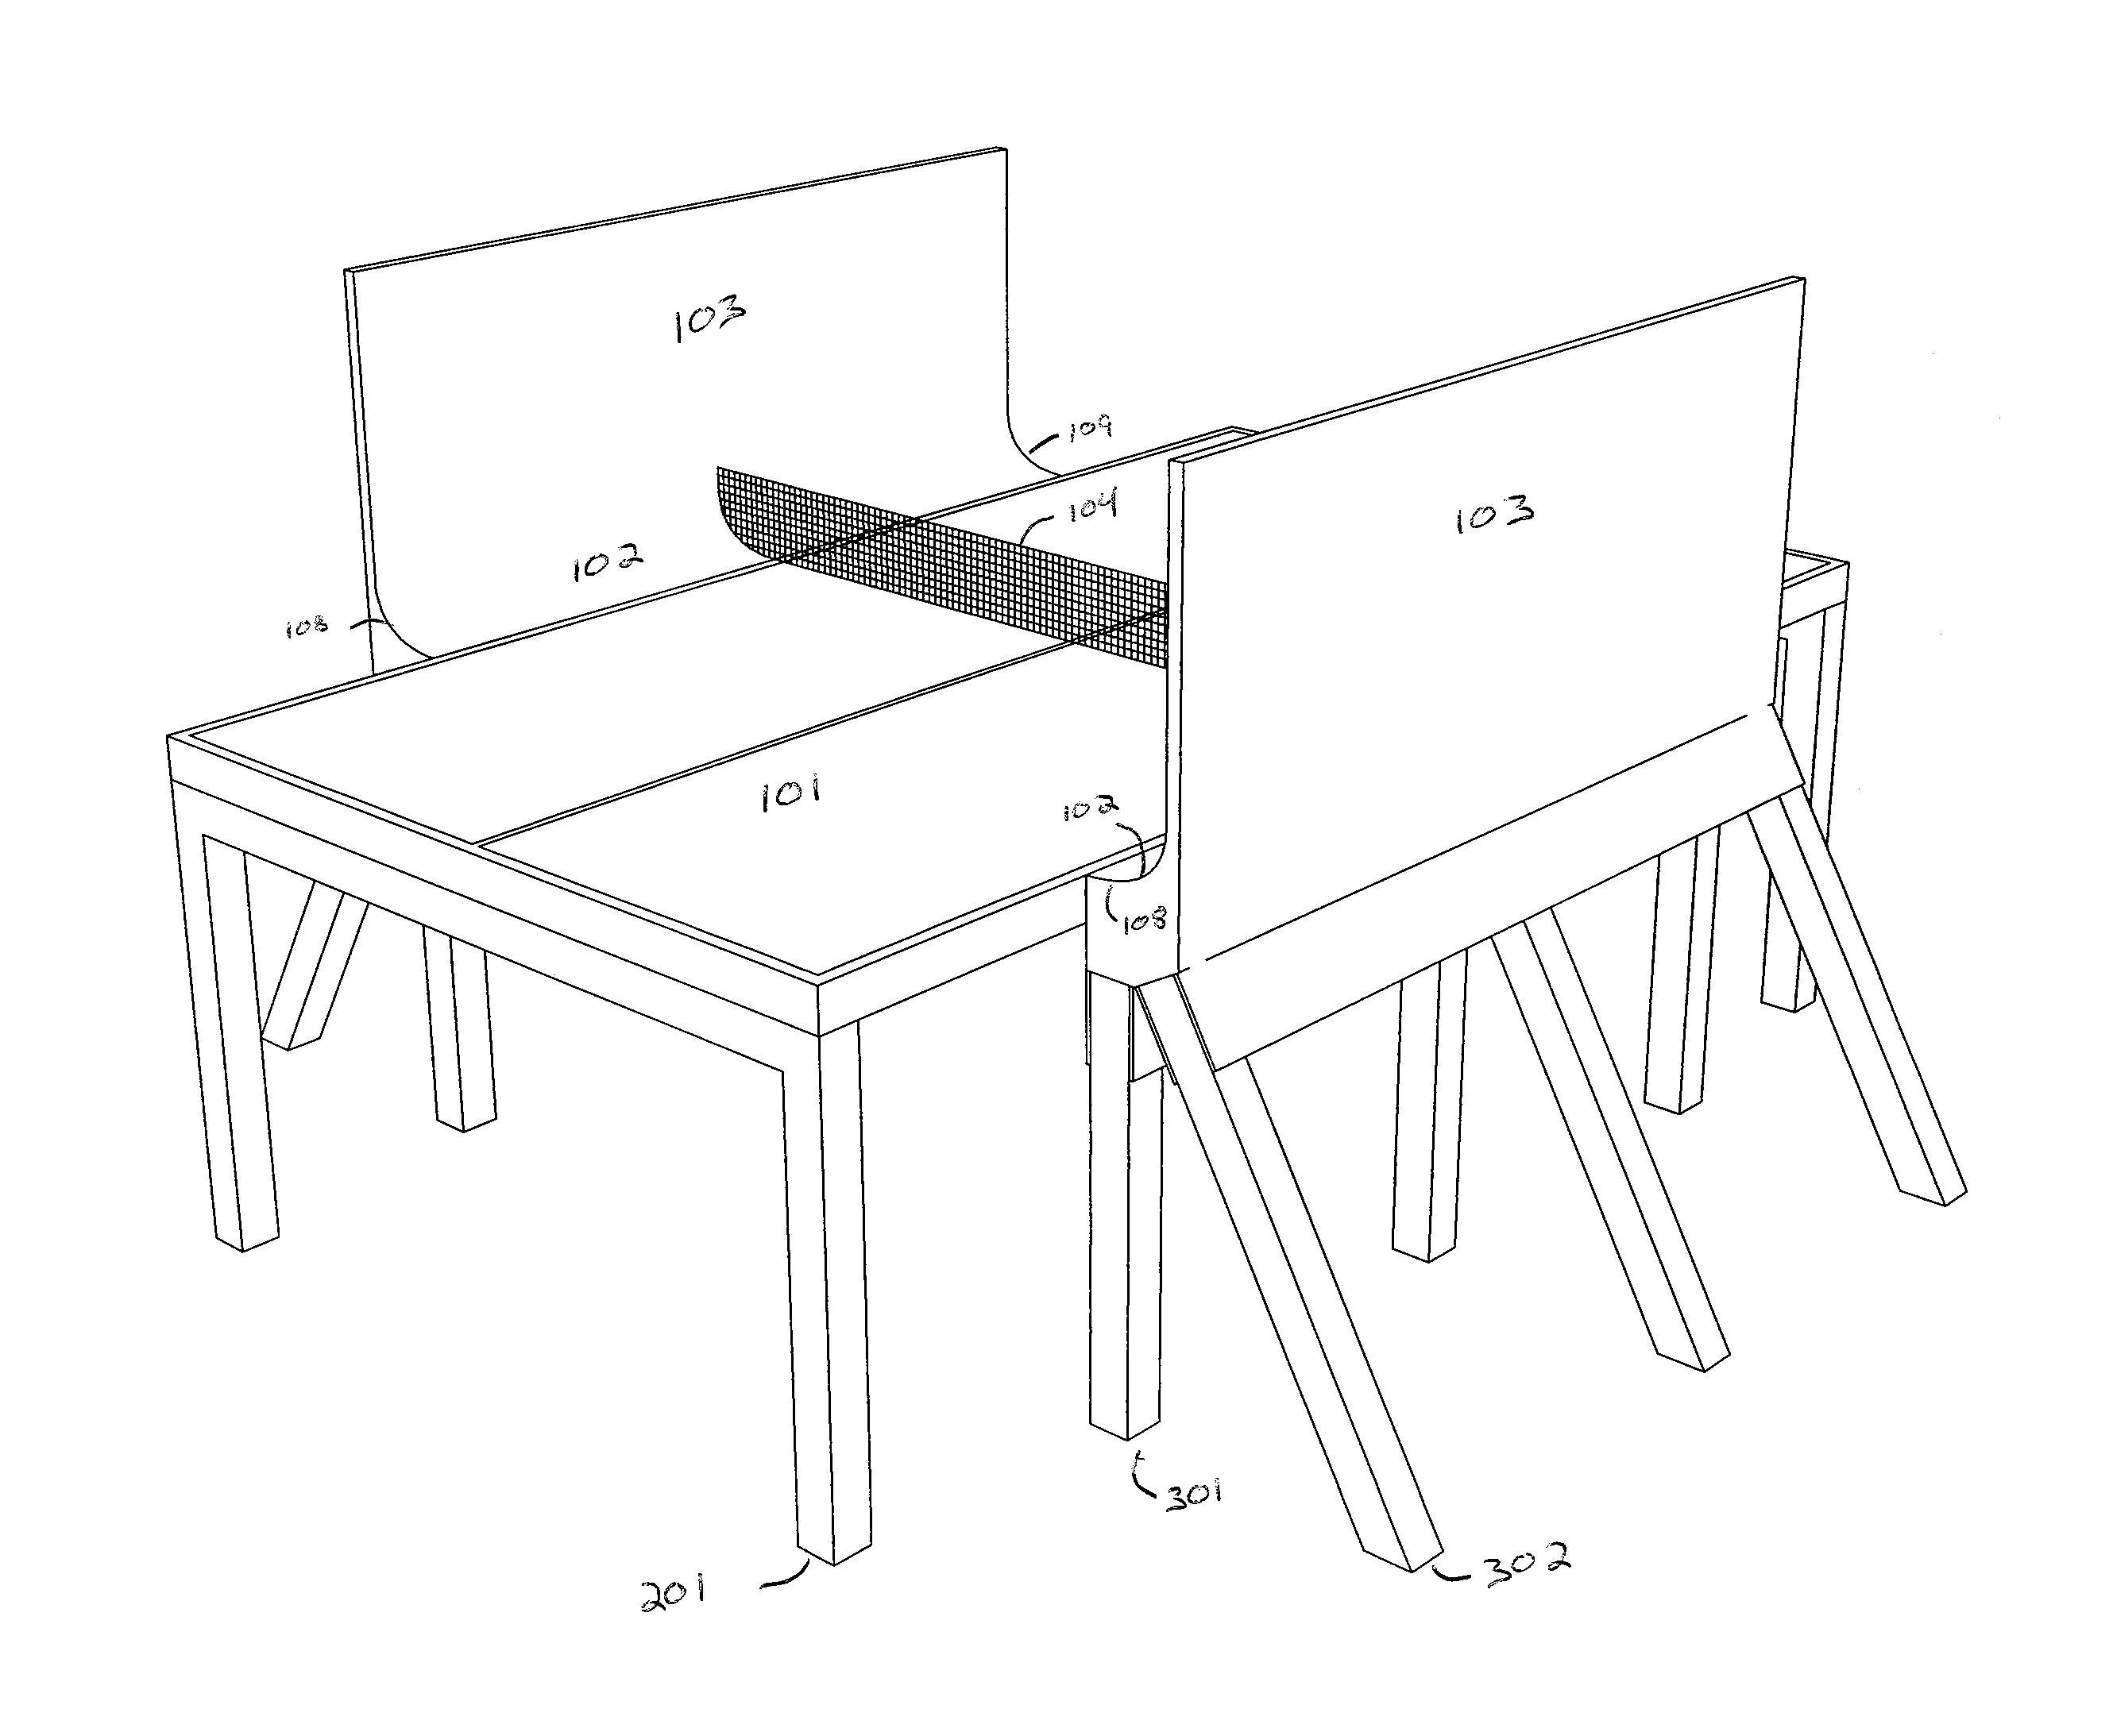 Extended playing surface apparatus for table tennis